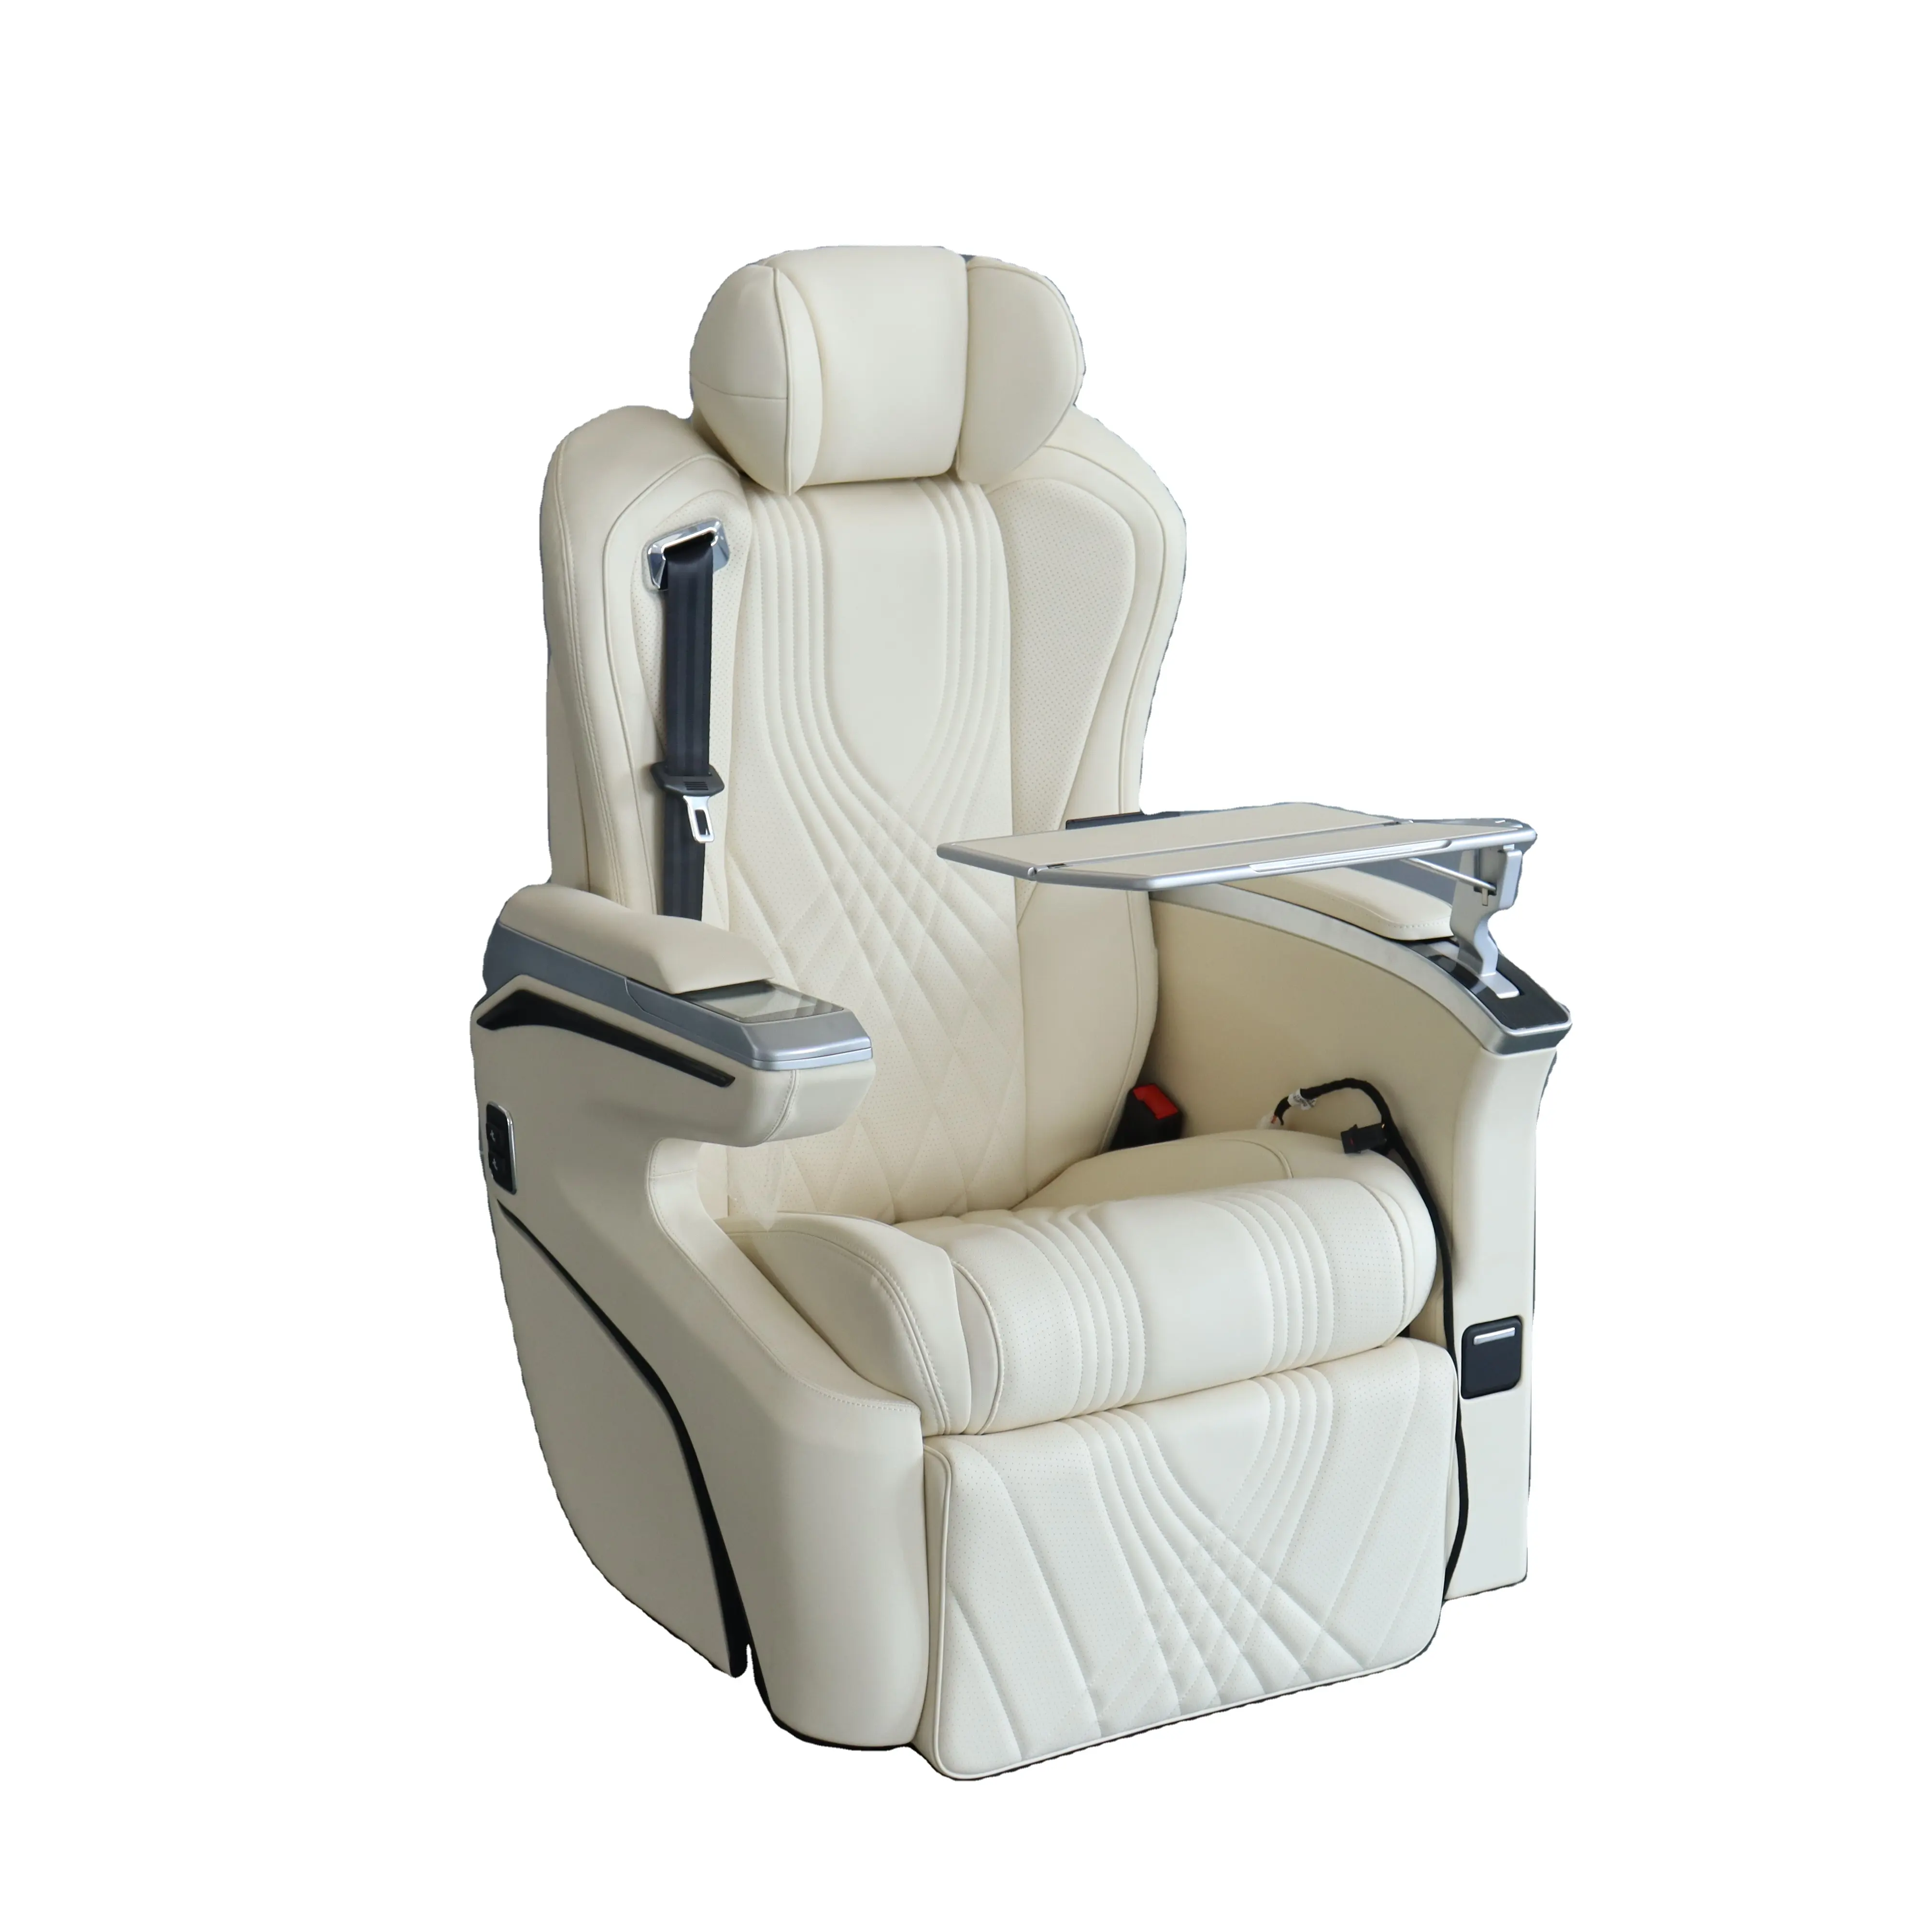 New luxury modified car seat maybach VIP van converted auto Car captains Seats For vito w447 sprinter van v class